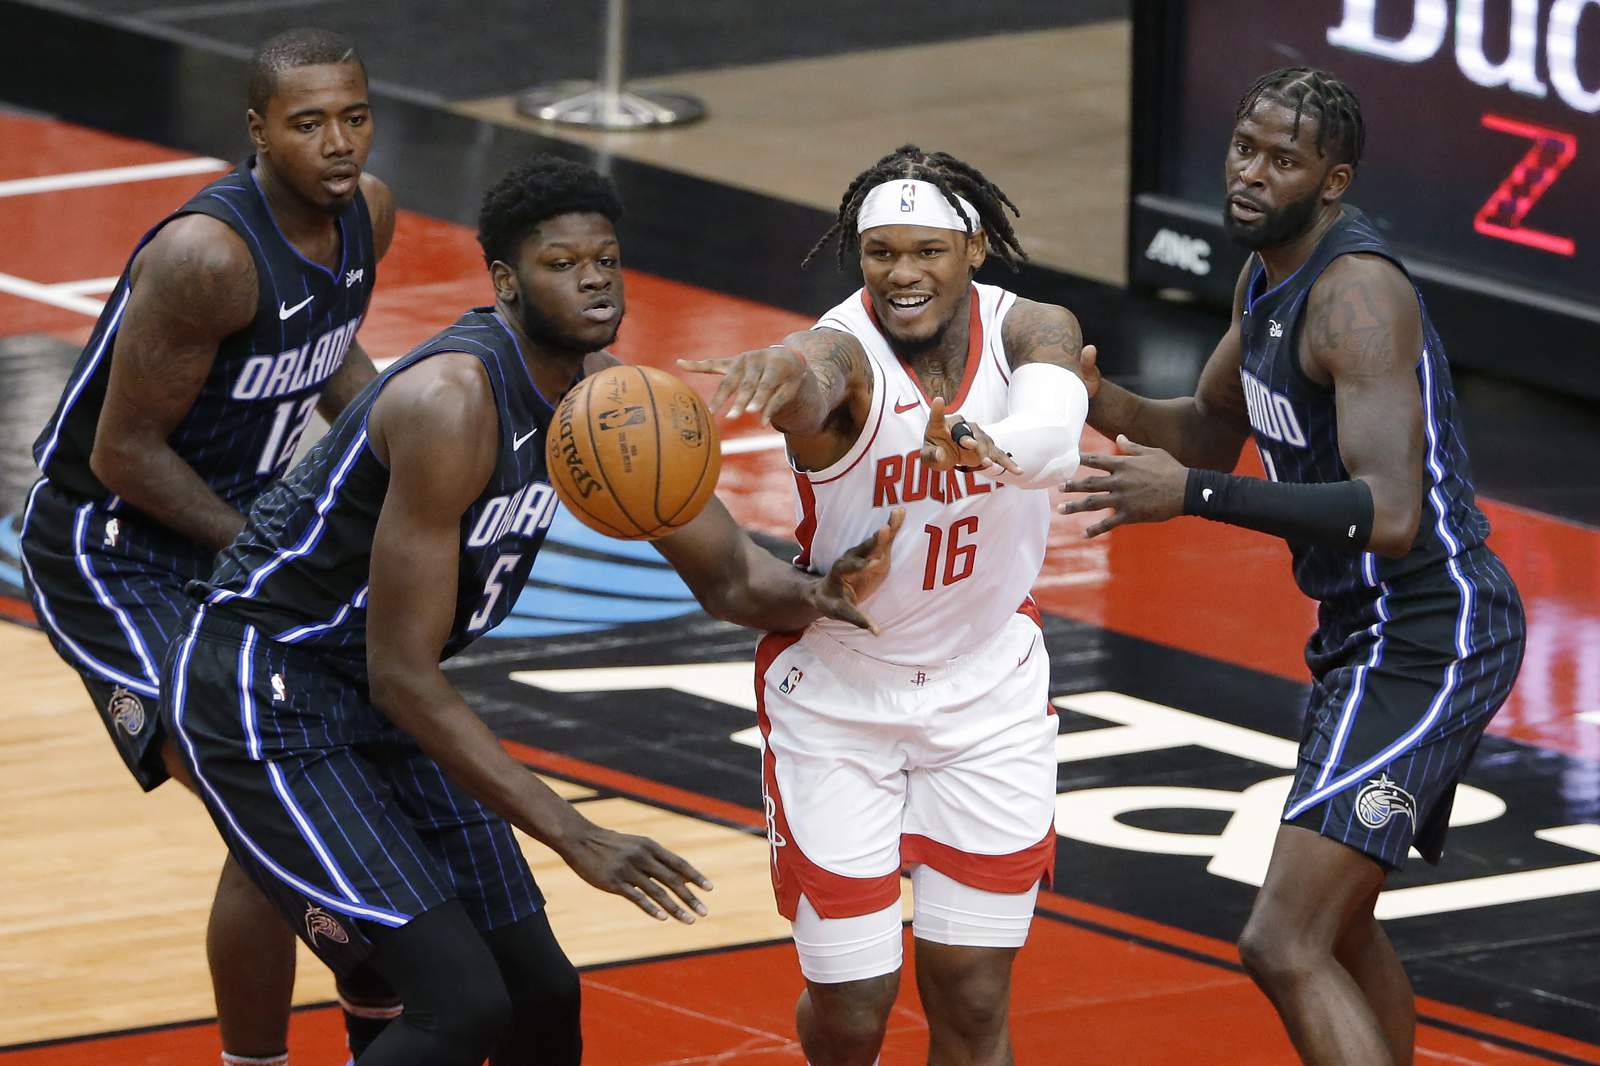 Wood scores 22 to lead Rockets to 132-90 rout of Orlando